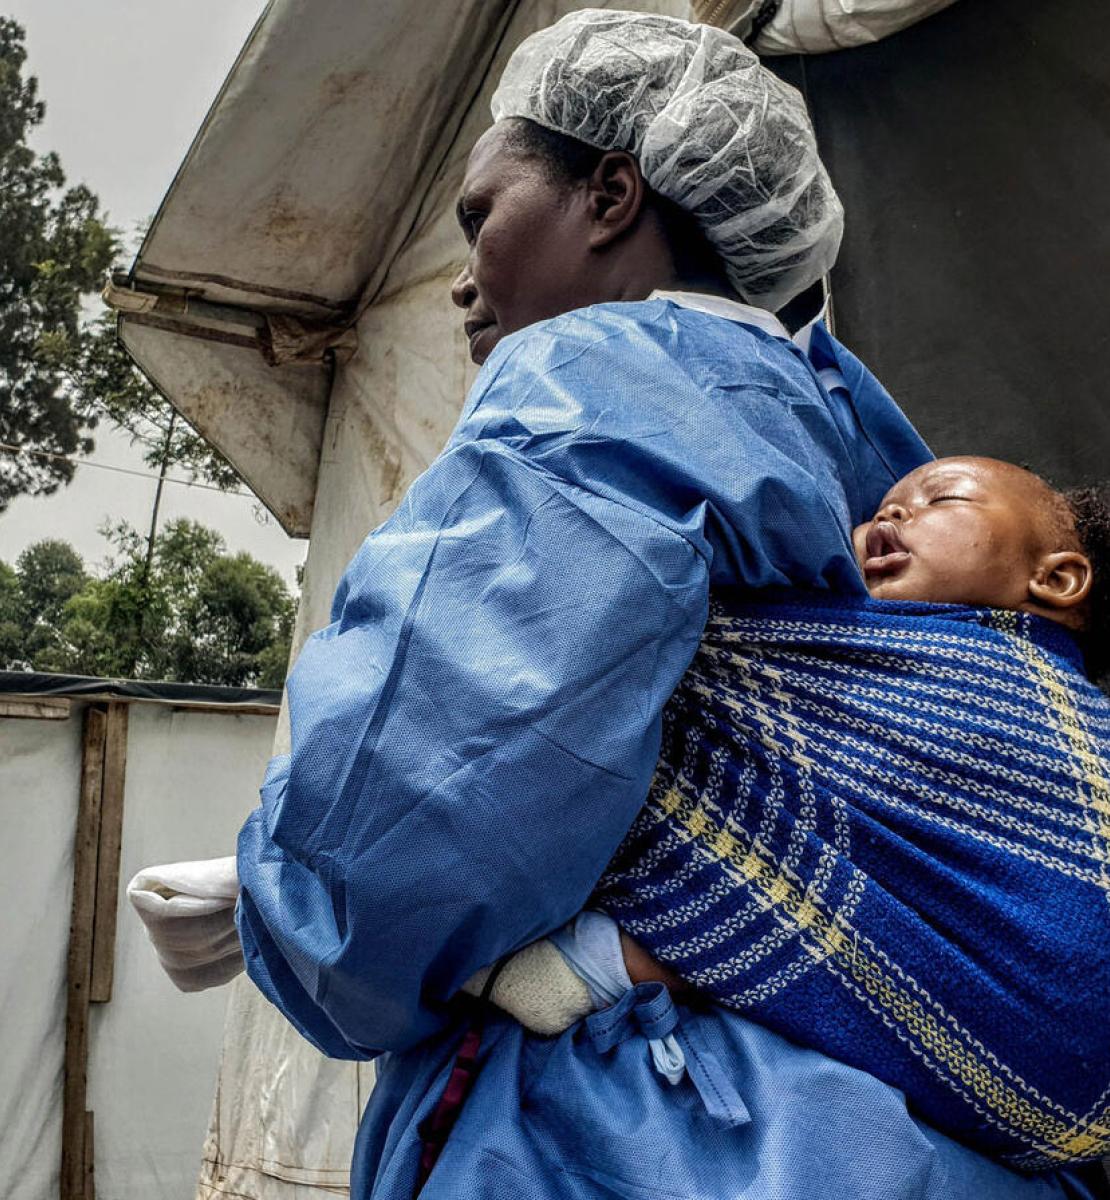 A woman wearing personal protective equipment carries a small baby on her back. 